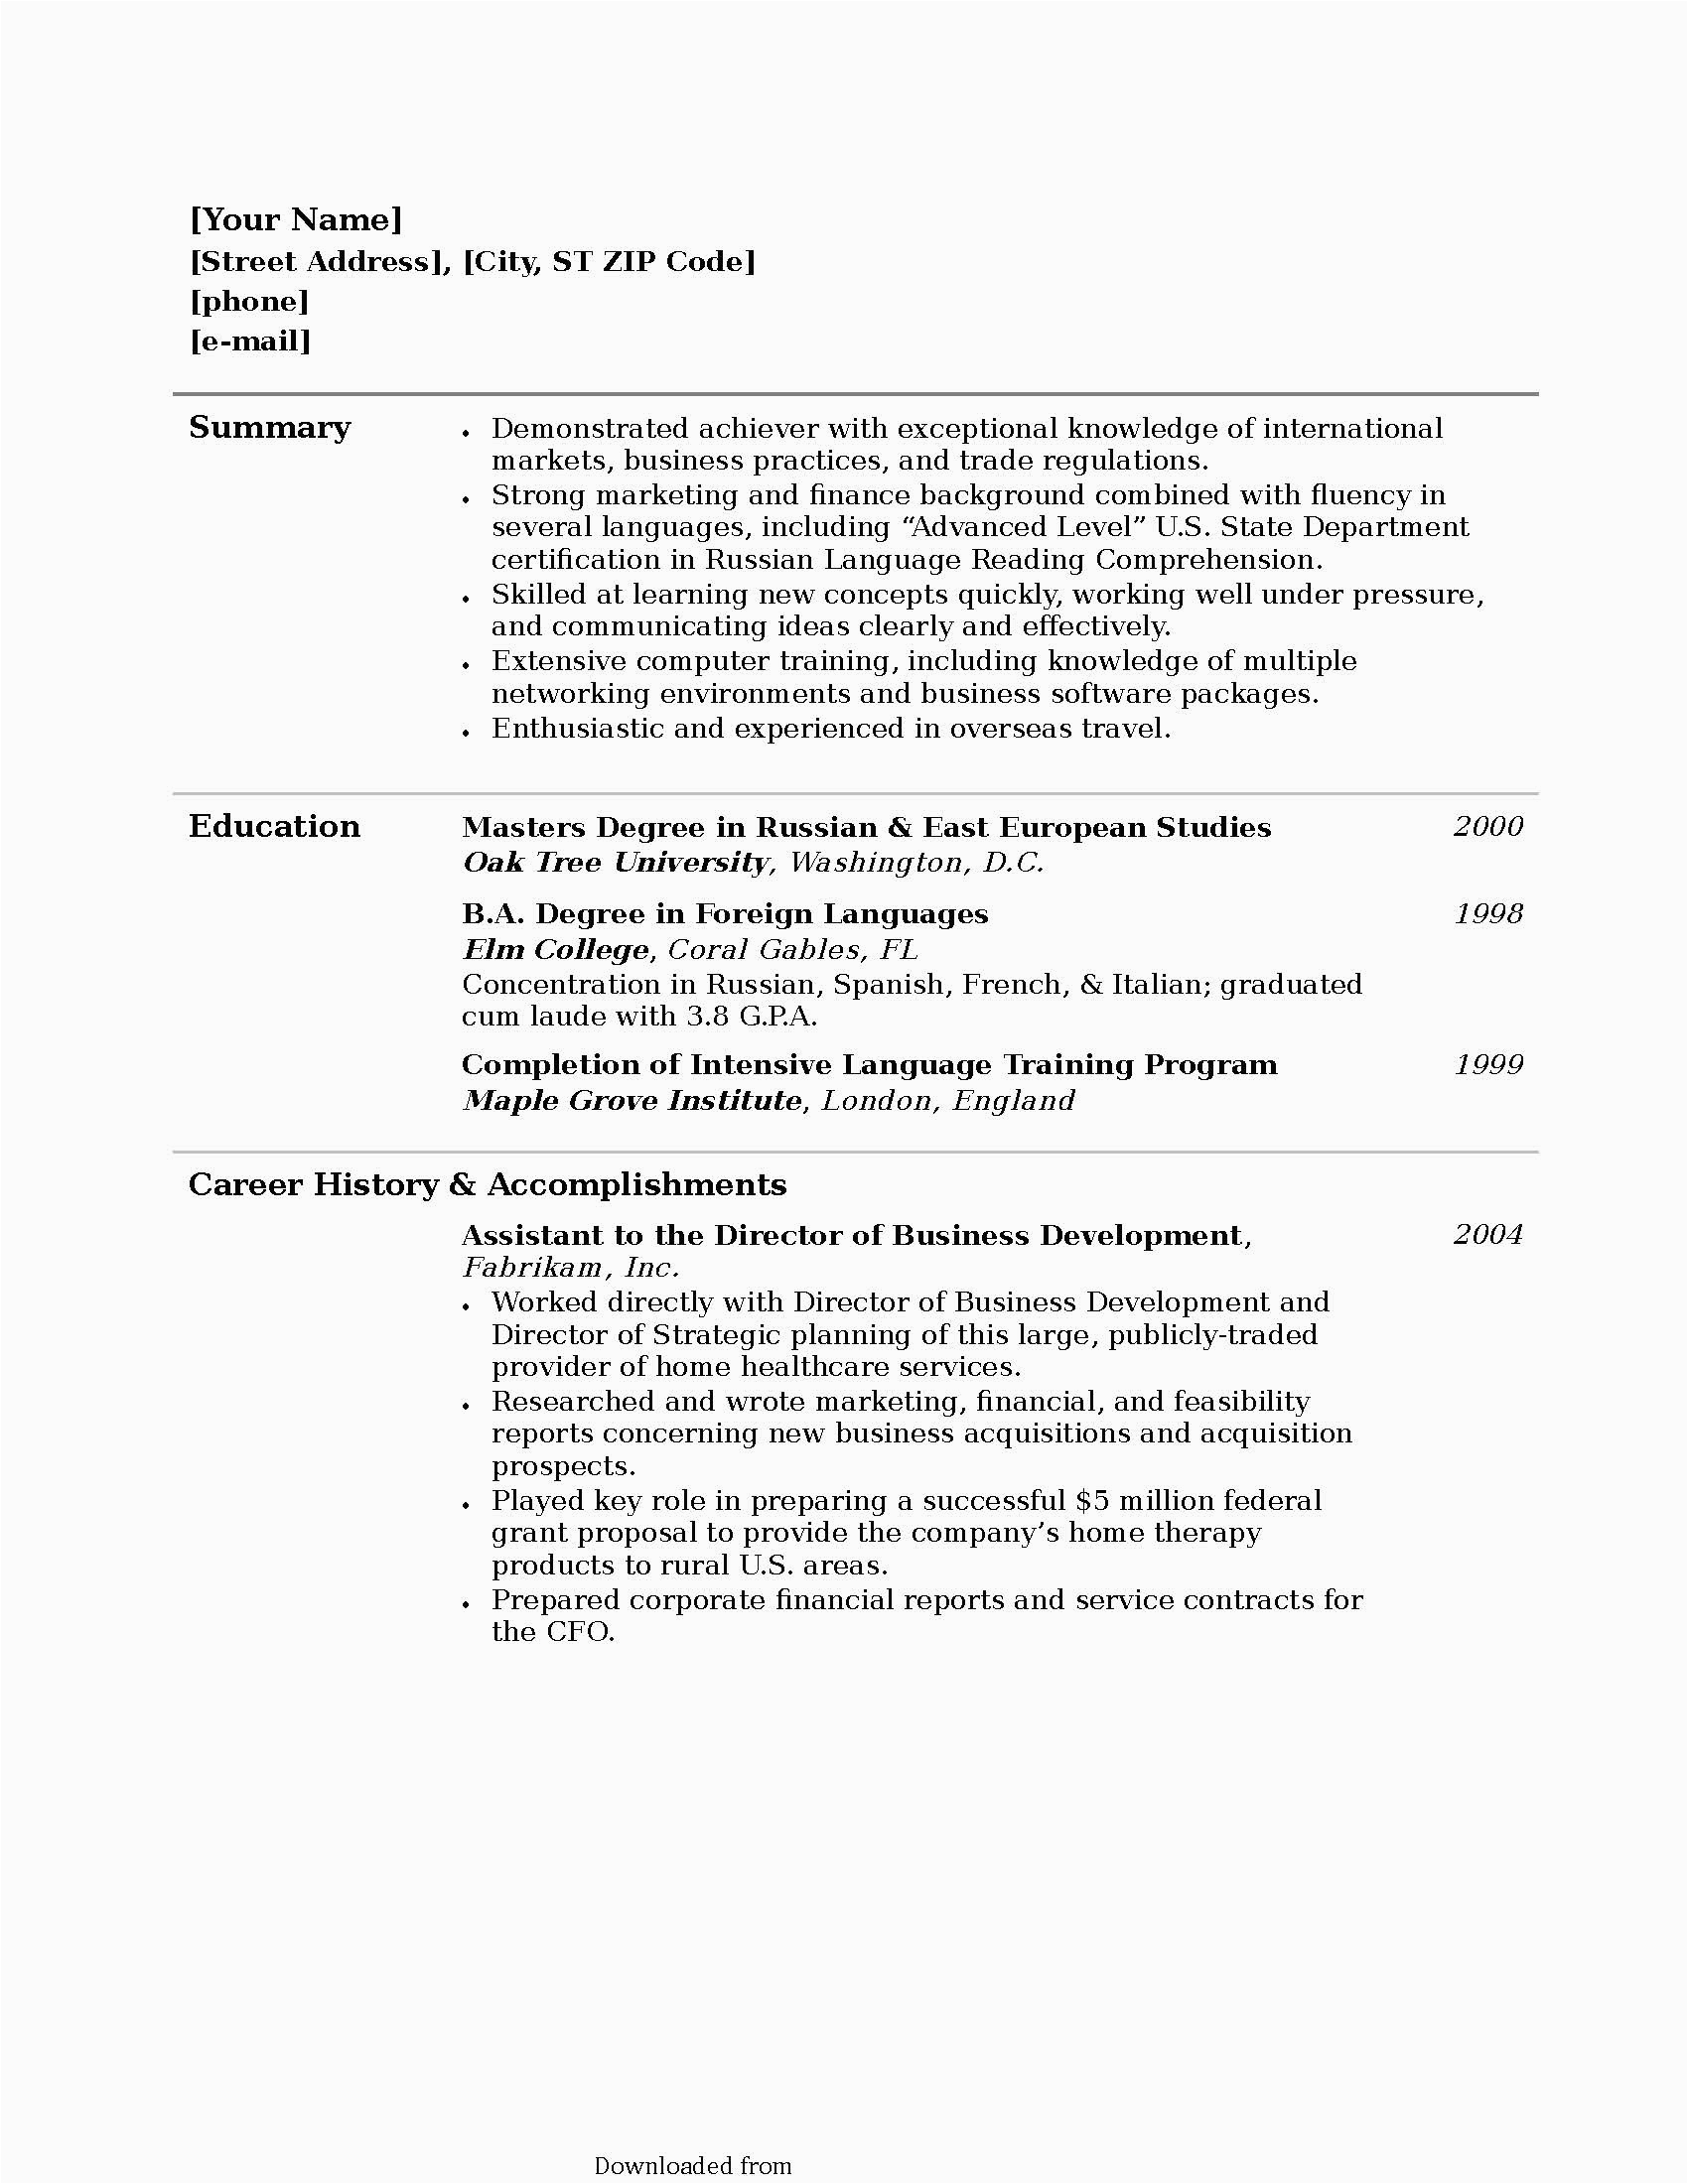 Resume Templates for Graduating College Students College Graduate Functional Resume Pdf format